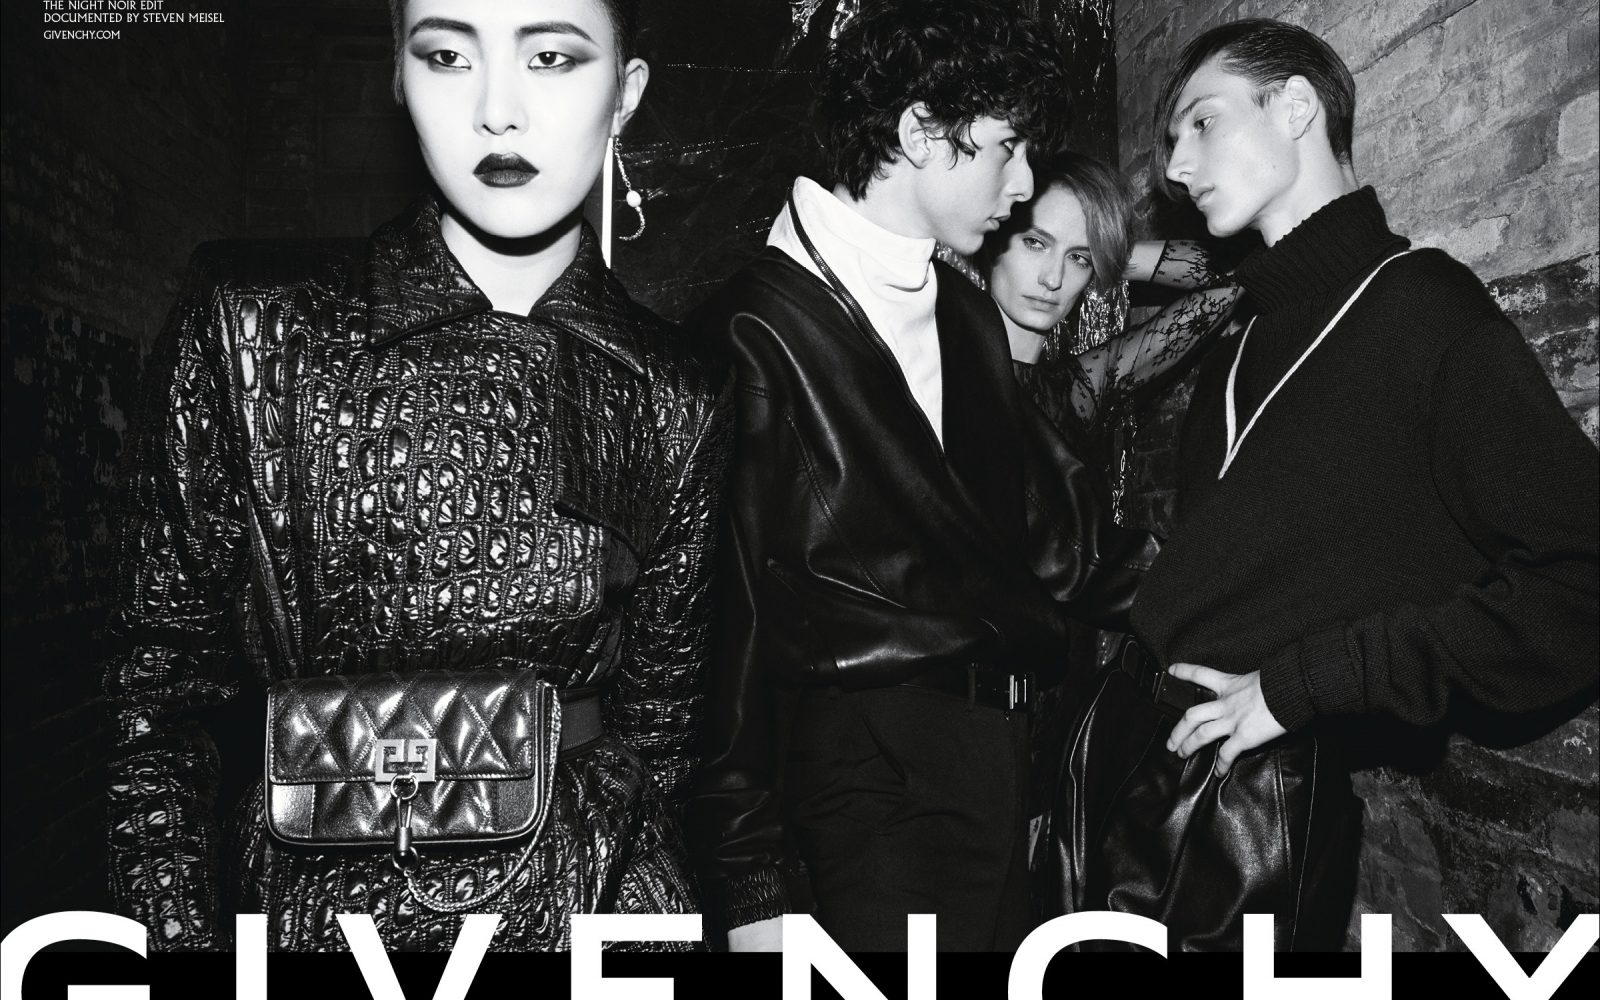 Givenchy Night Noir Campaign